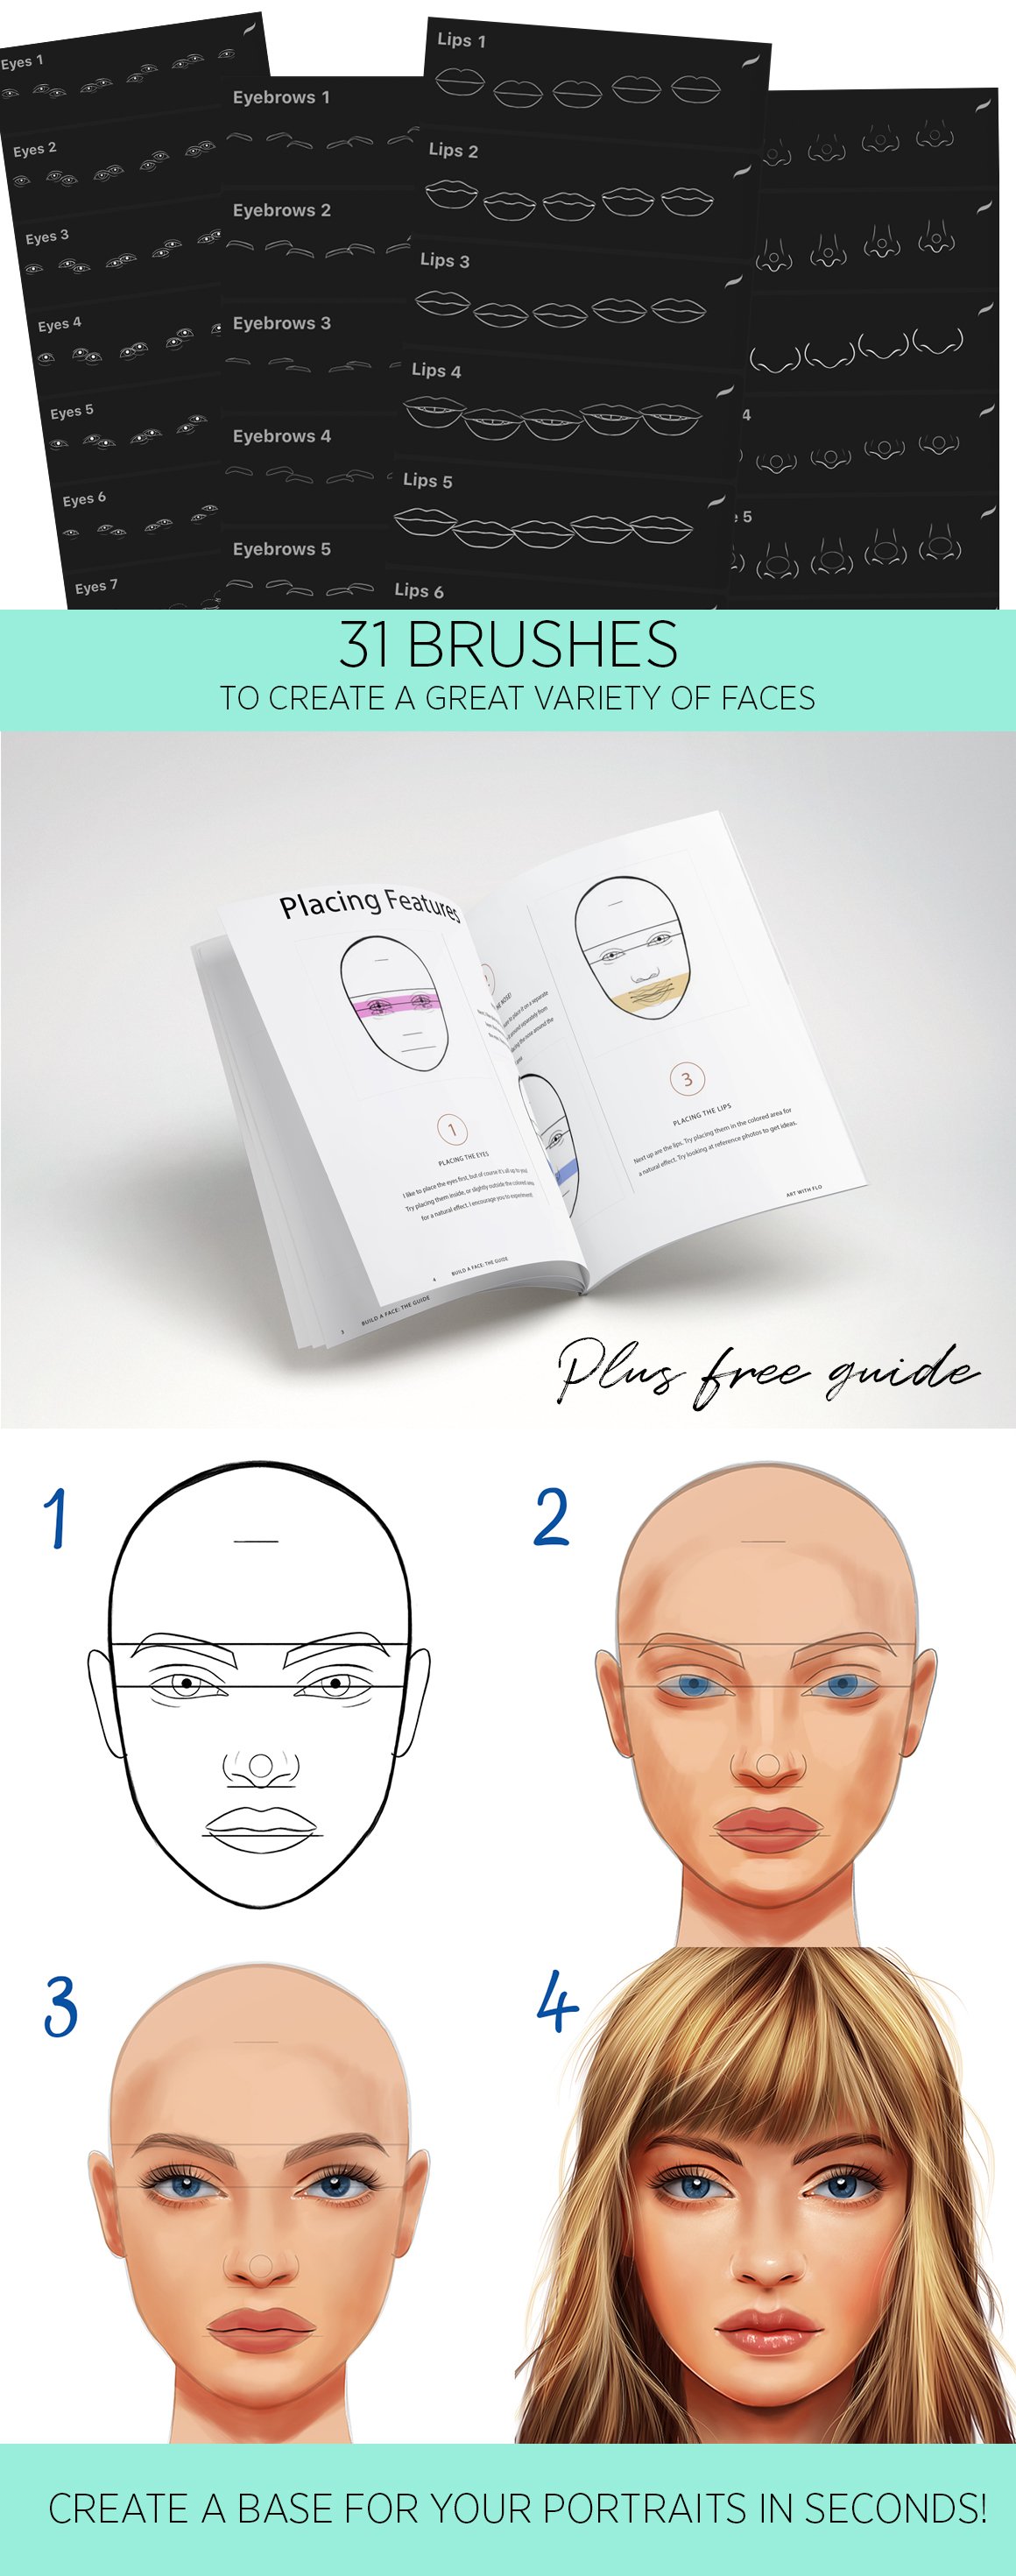 Build a Face Brushset